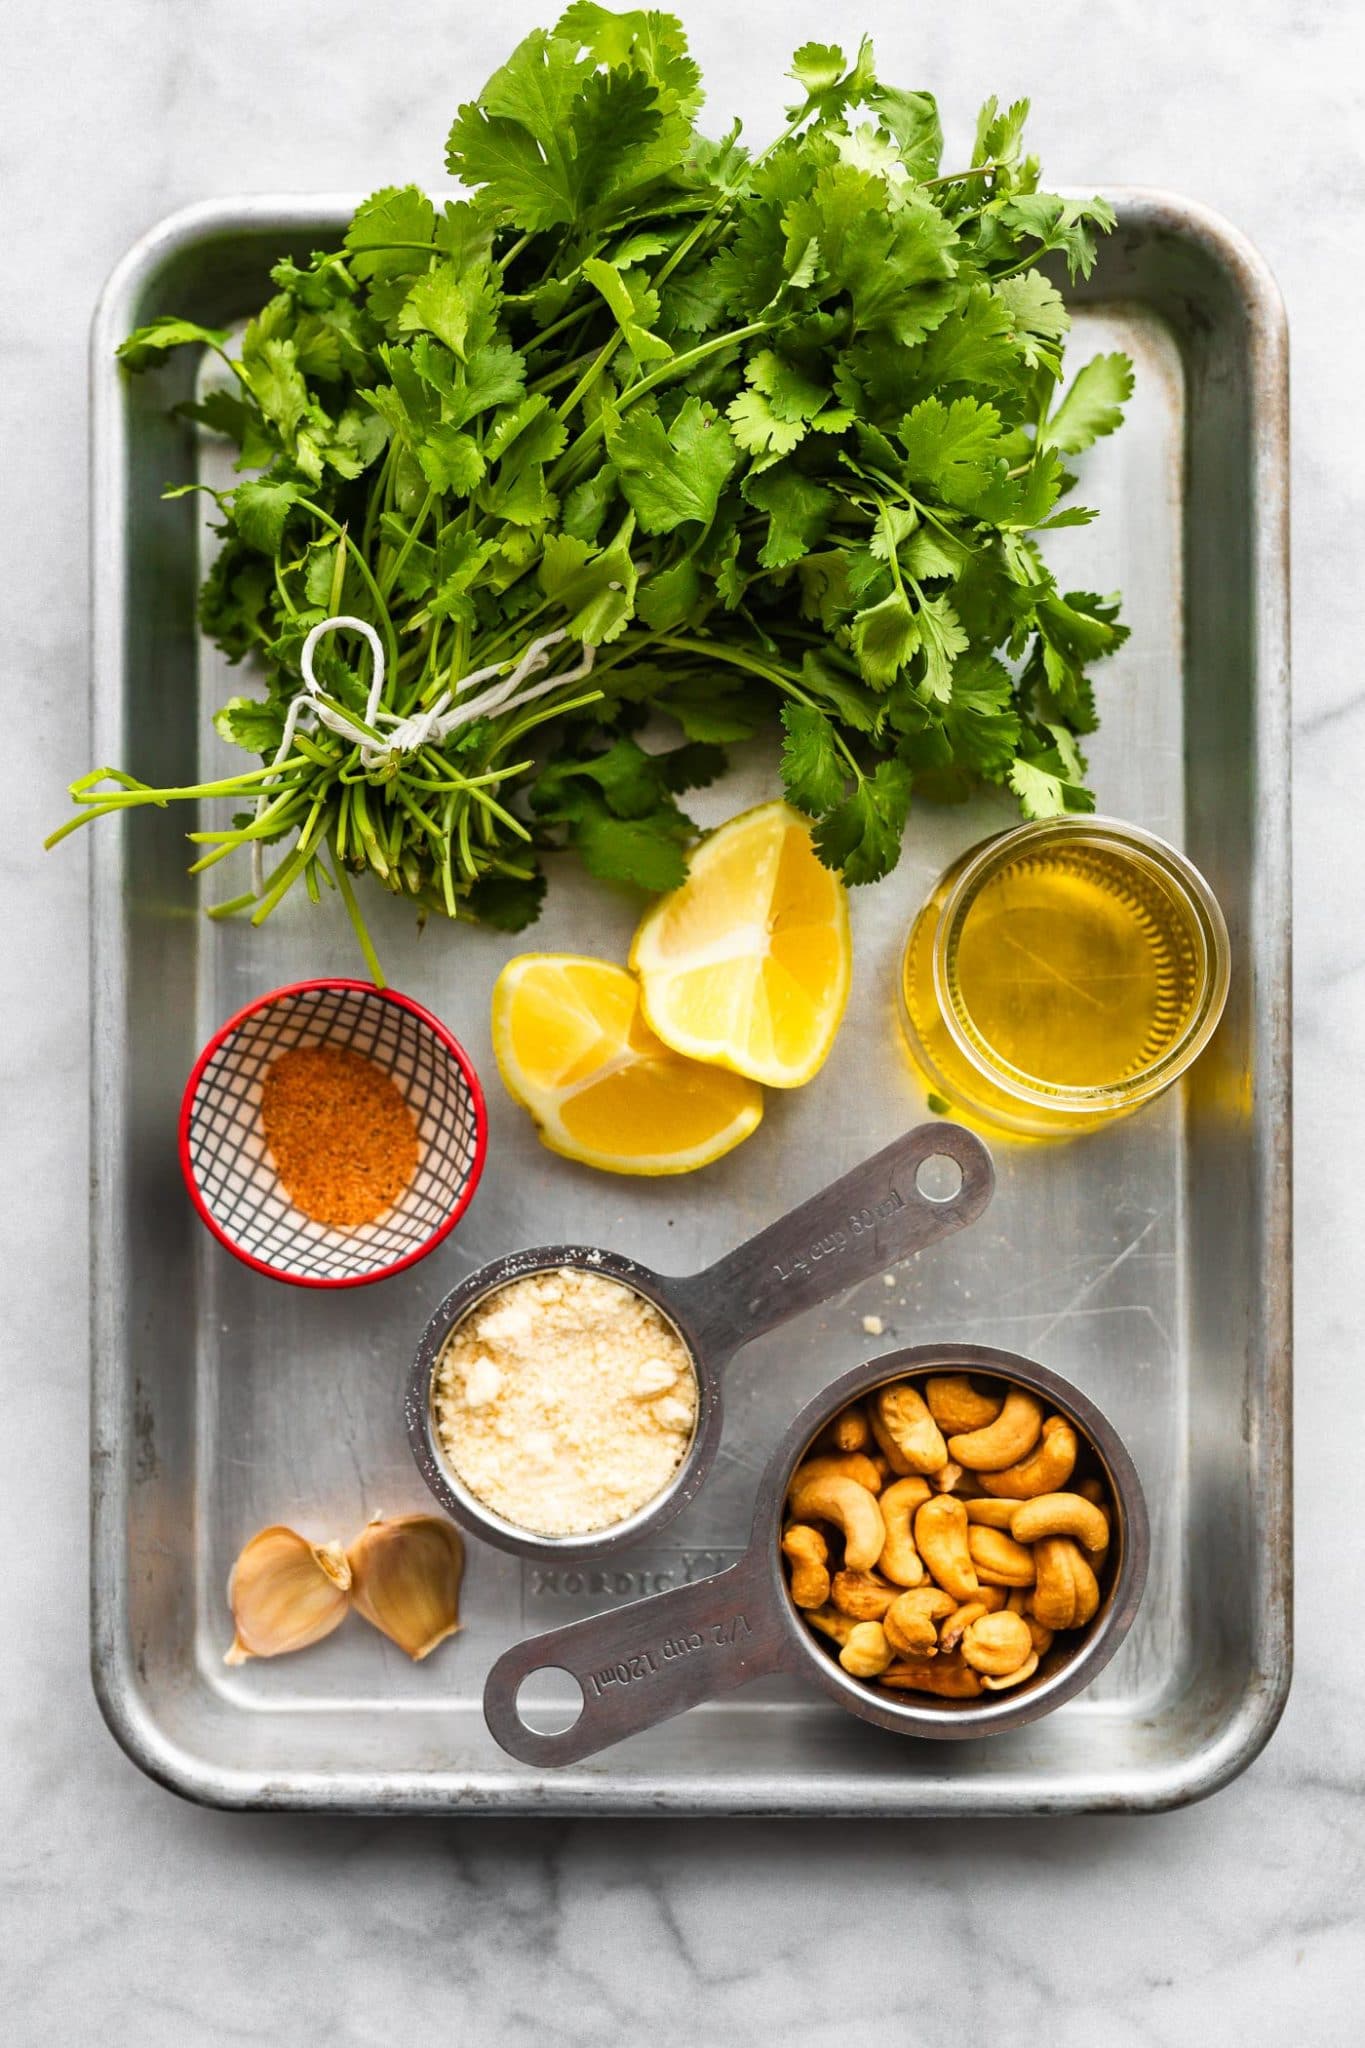 a baking pan willed with ingredients for cilantro pesto including cilantro, lemon wedges, olive oil, spices, grated Parmesan, cashews, and garlic